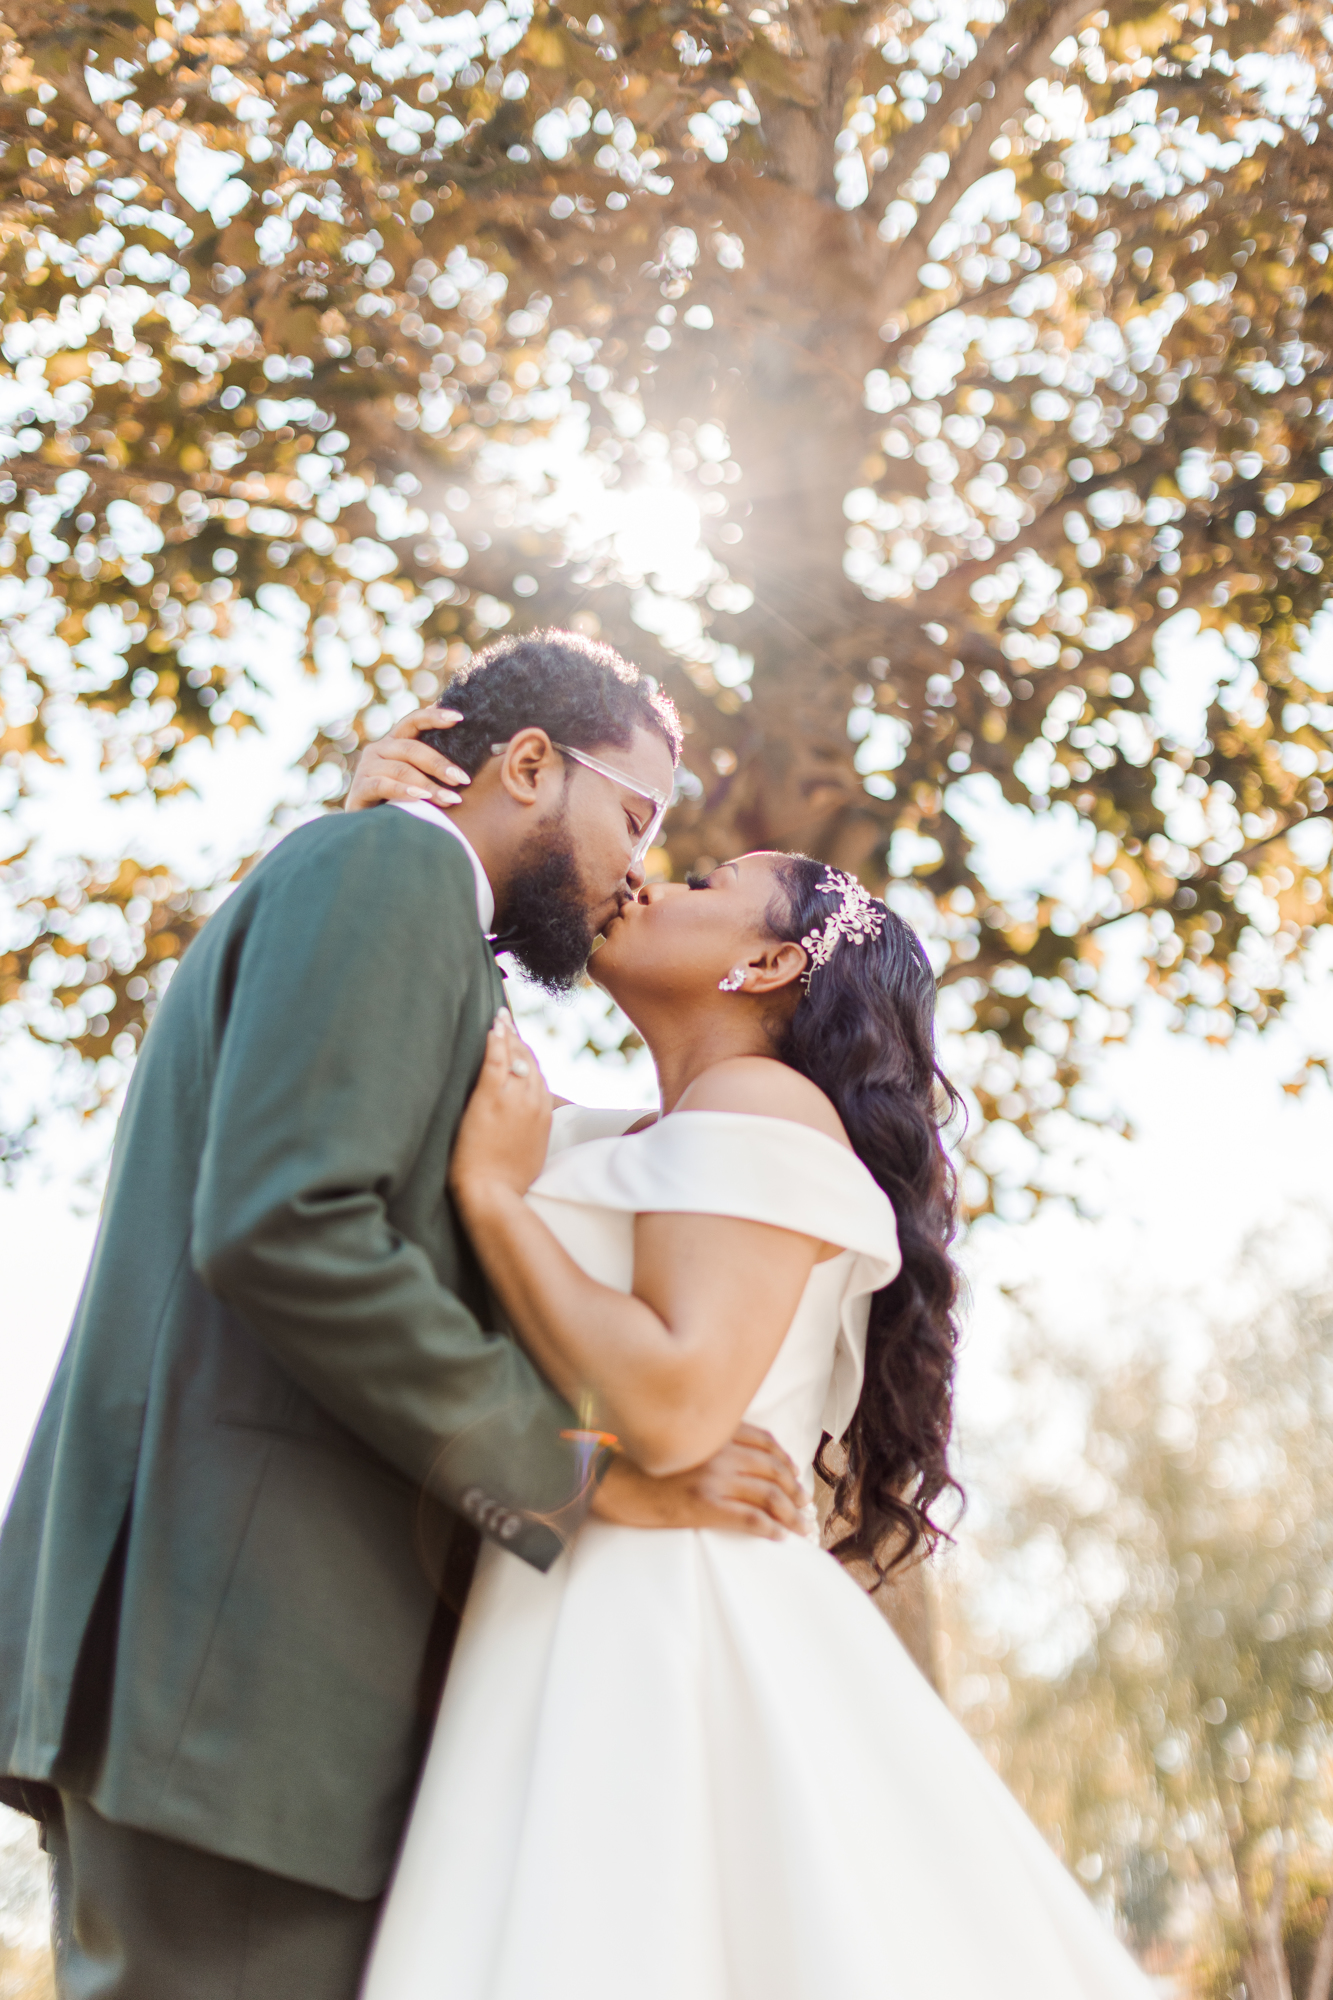 Eye-catching New Jersey Wedding Photos at Edgewood Country Club in Fall